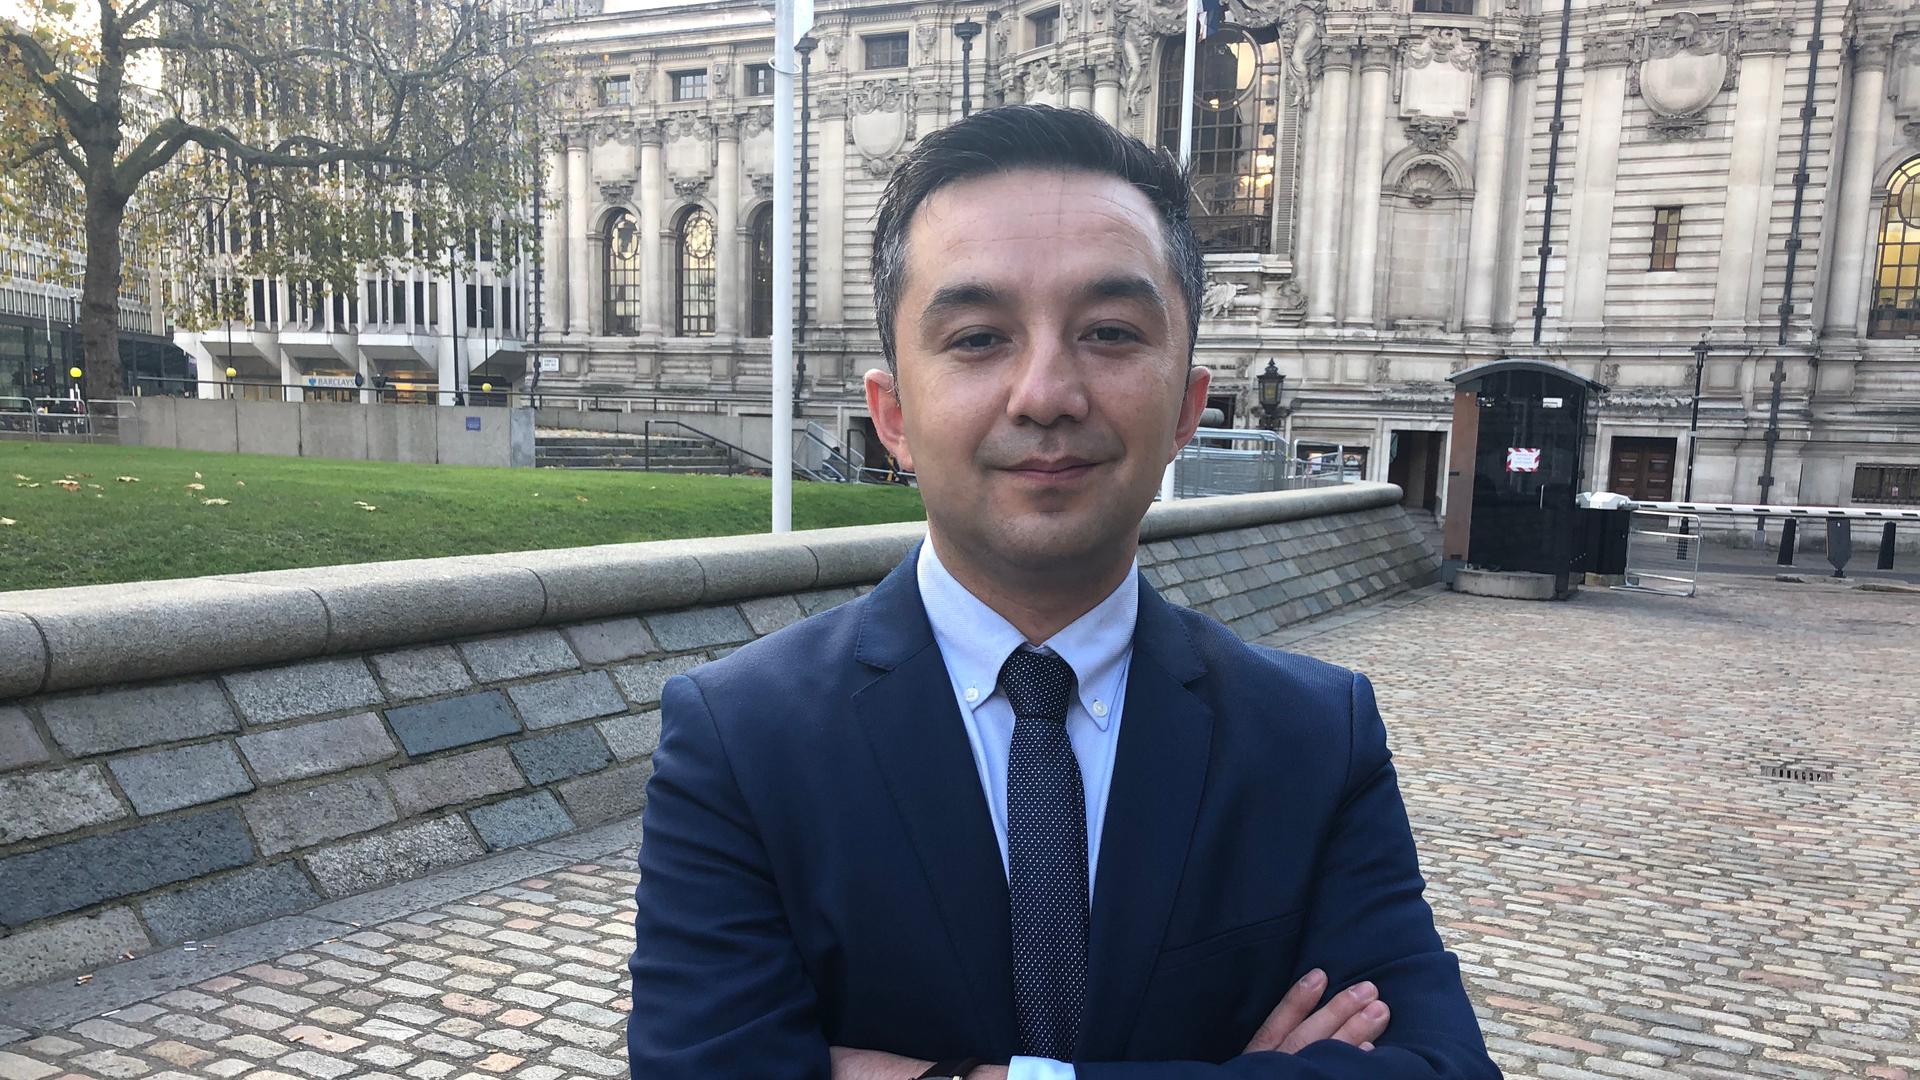 Ferkat Jawdat, a Uighur living in Virginia, has asked the US government to pressure China to release minorities, including his mother, from "re-education camps." 